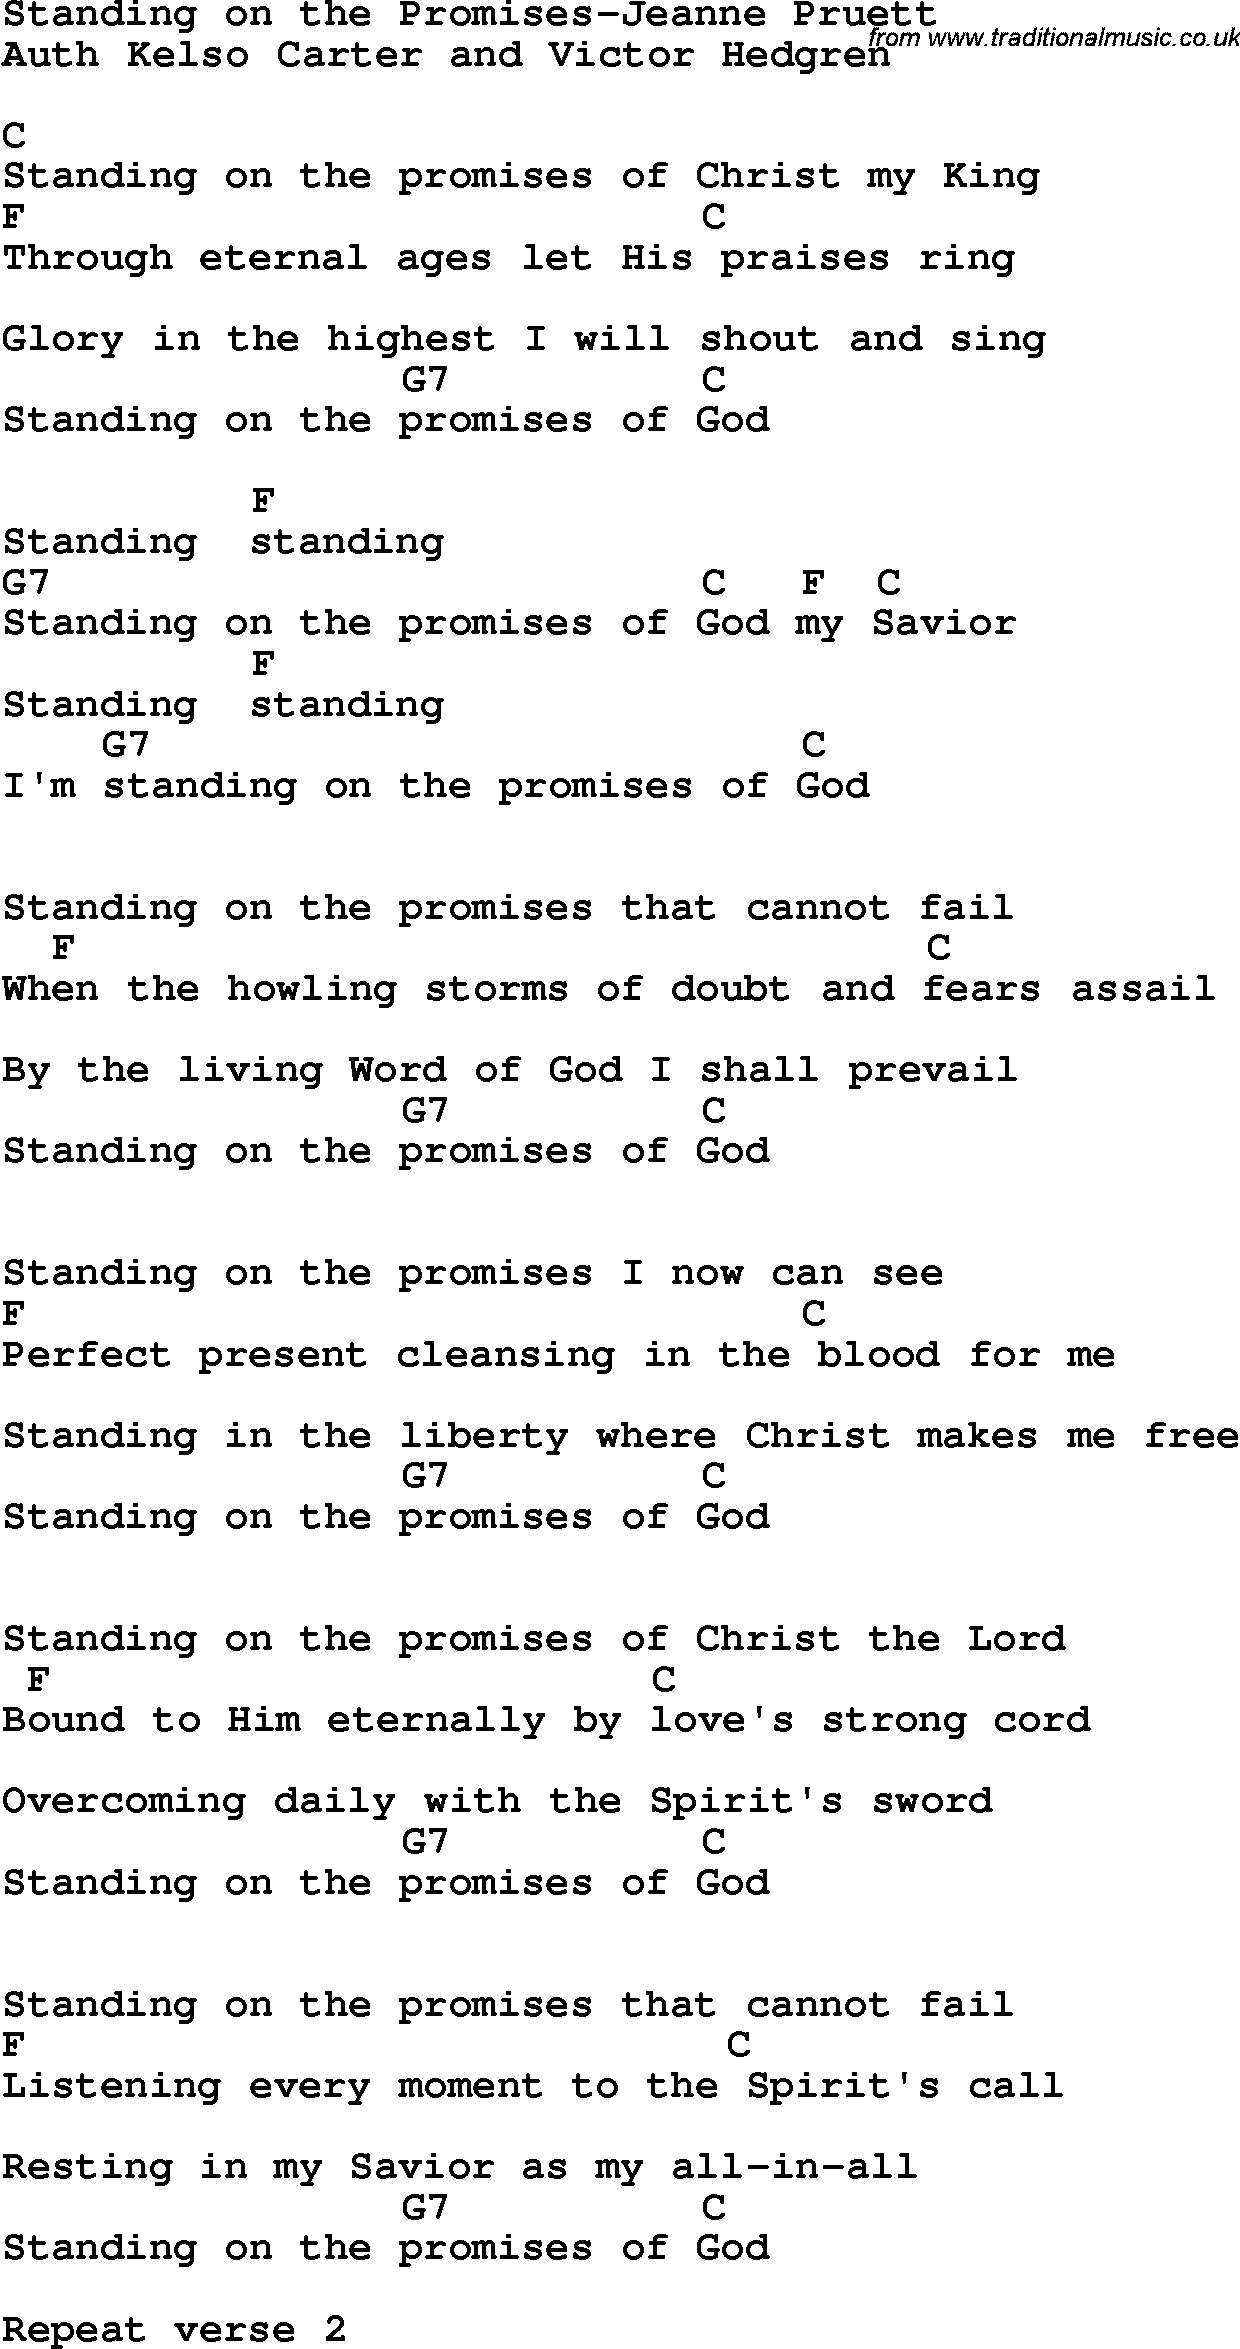 Country, Southern and Bluegrass Gospel Song Standing on the Promises-Jeanne Pruett lyrics and chords